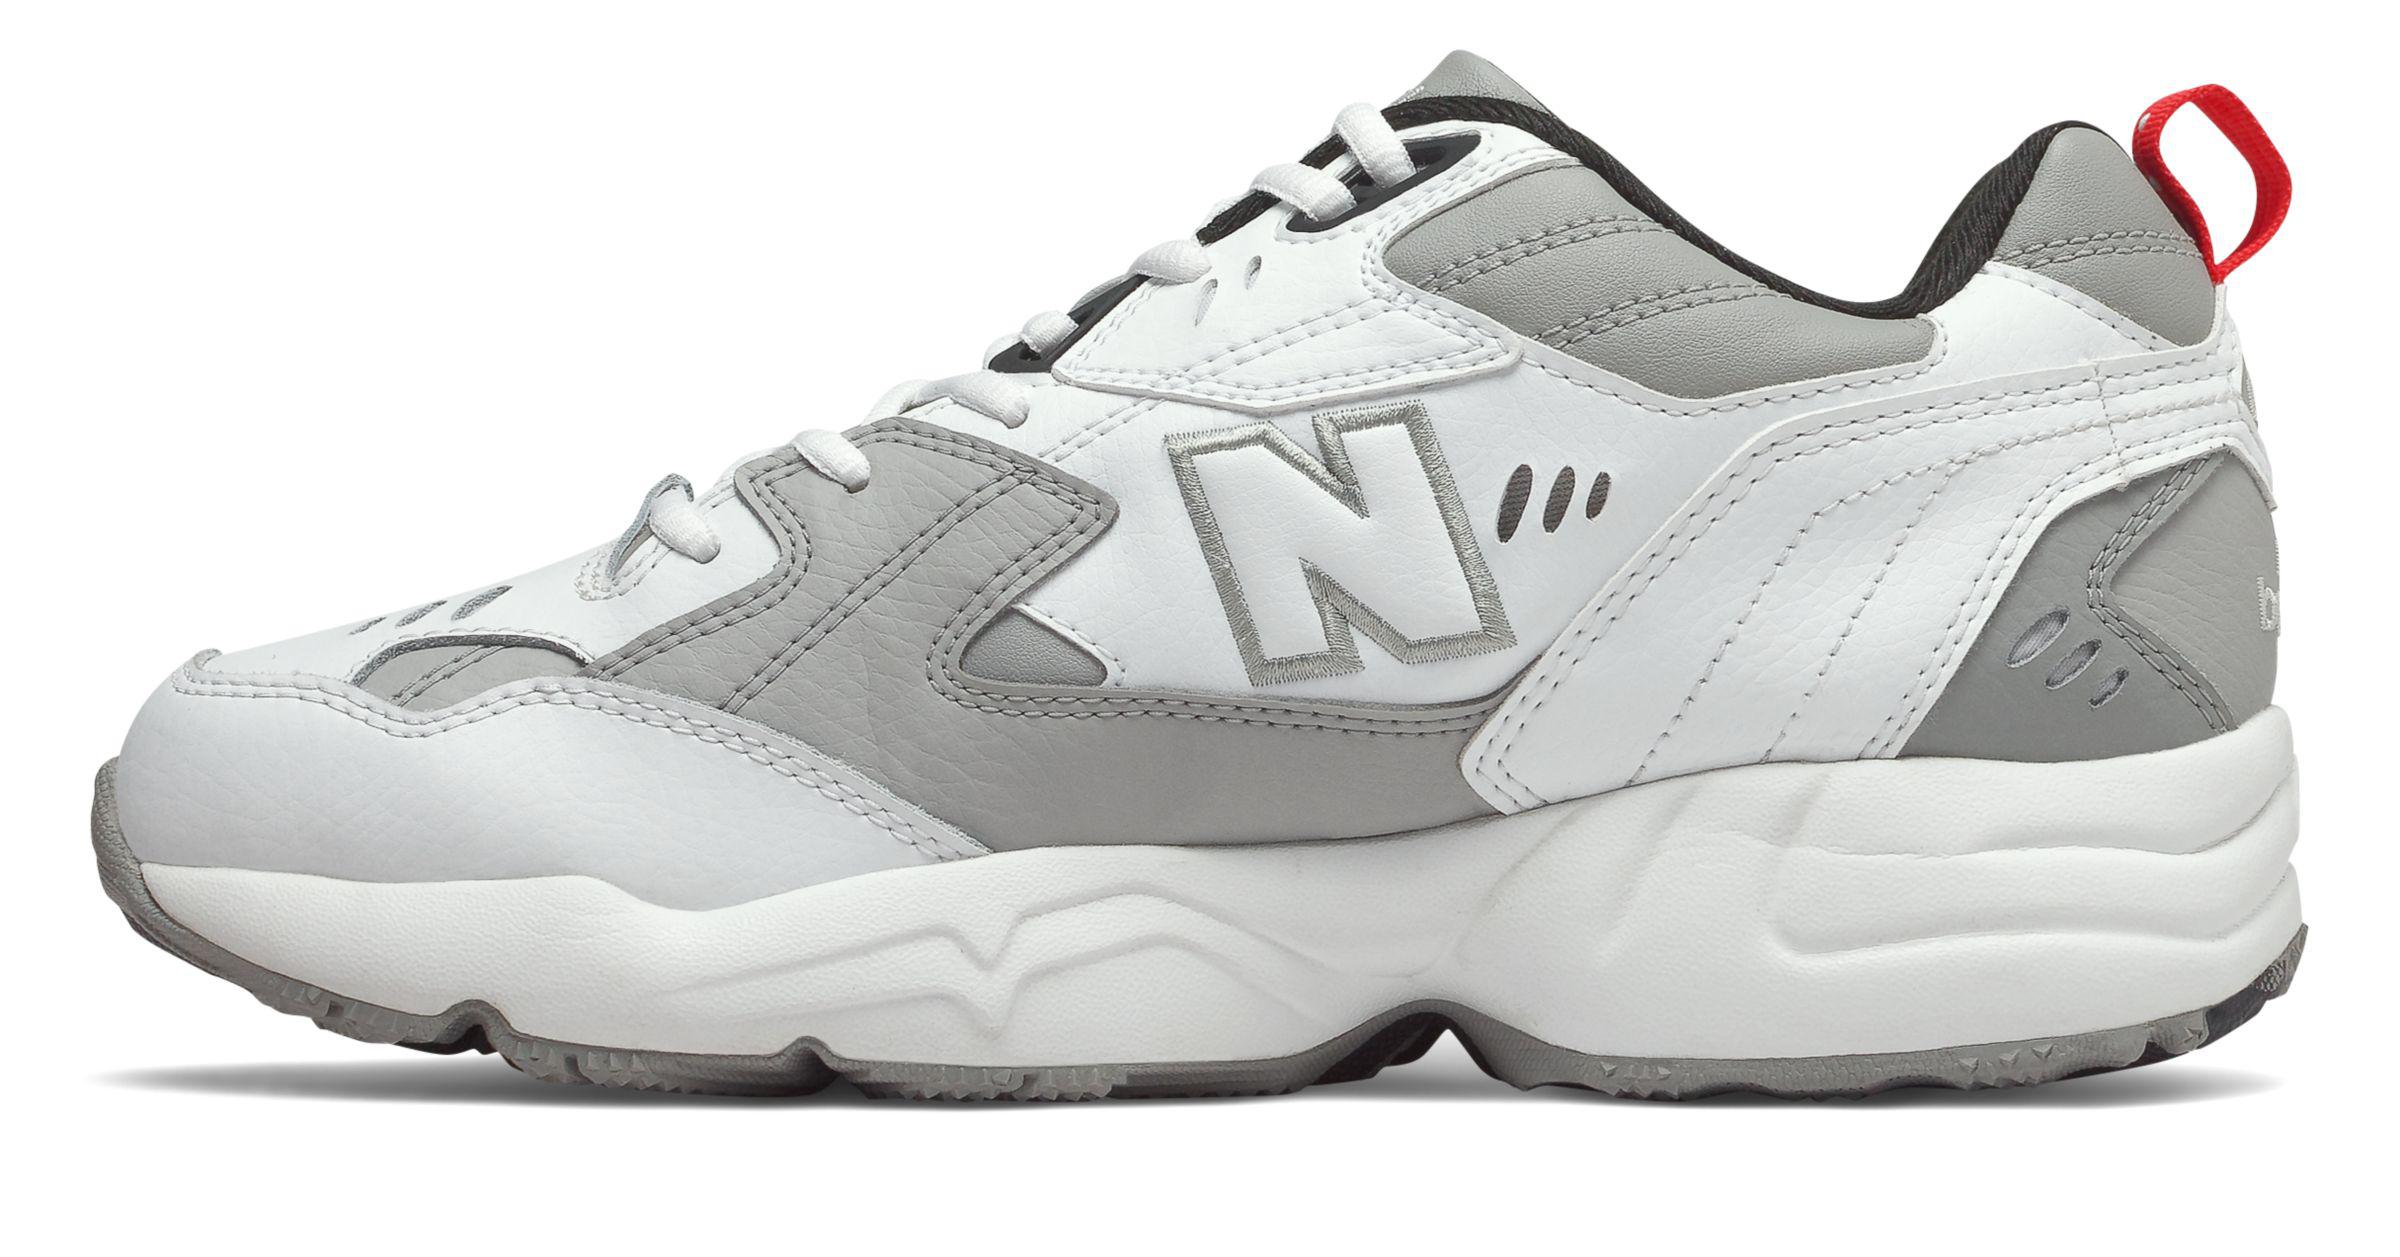 New Balance Leather 608v1 in White/Grey (Gray) for Men - Lyst